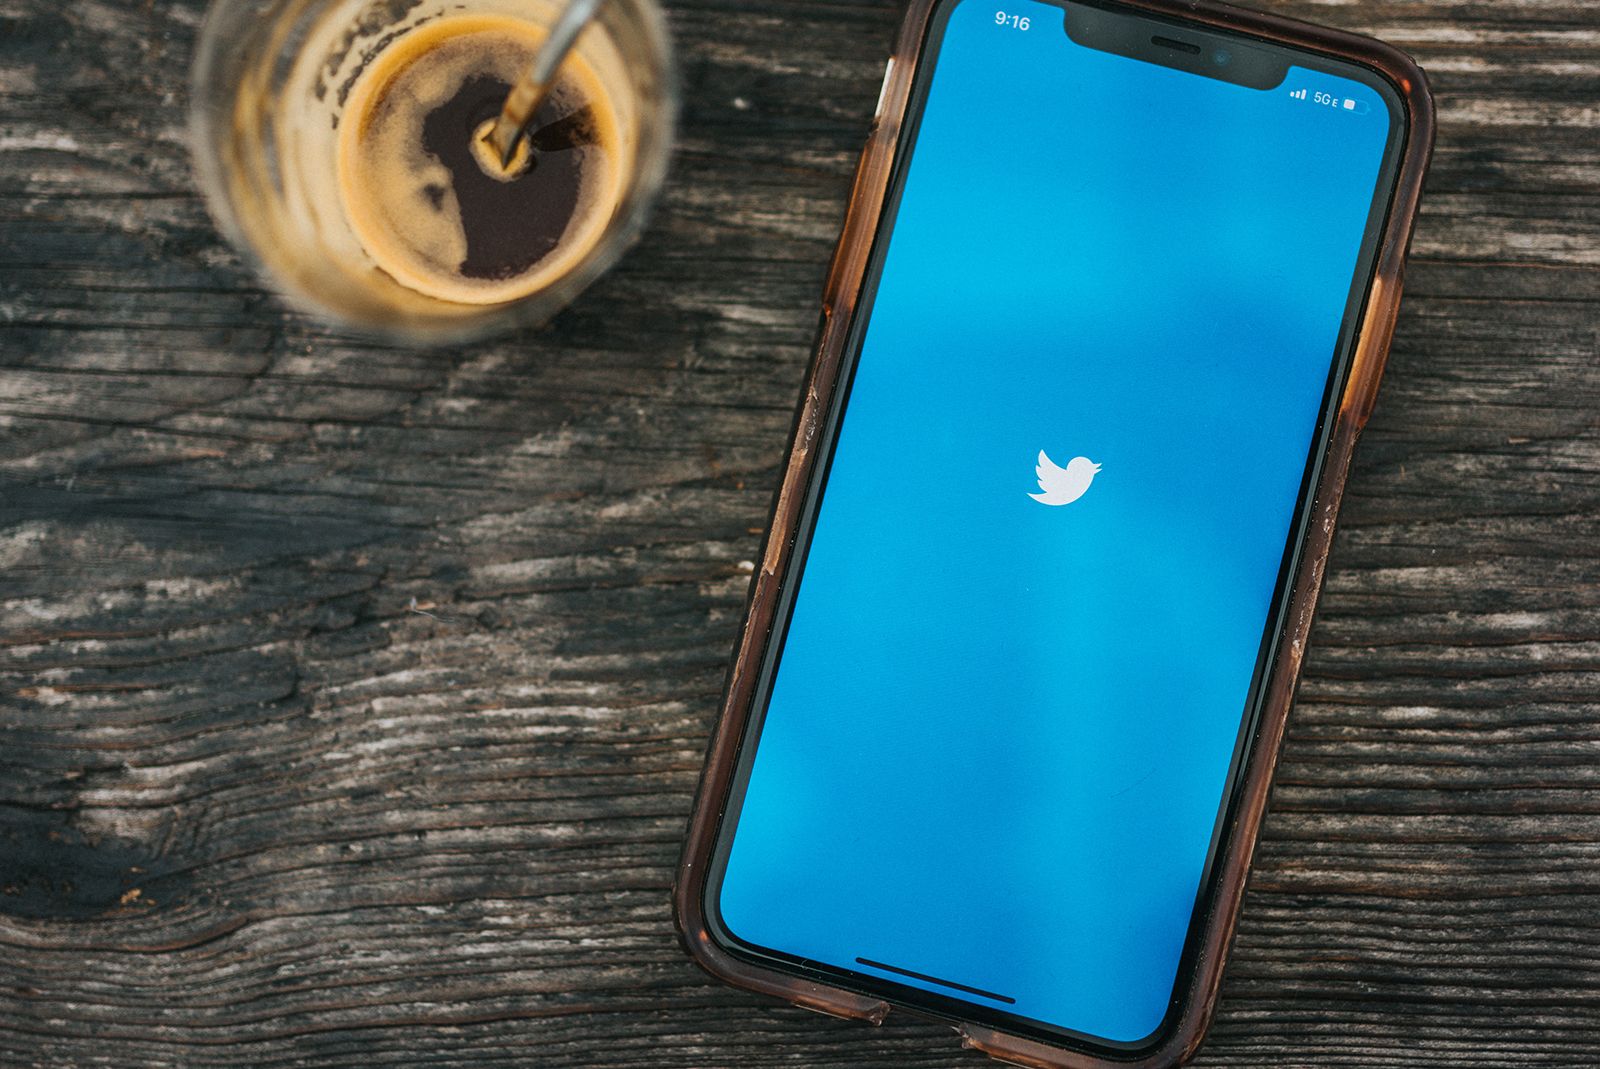 Twitter confirms ‘Blue’ paid subscription with color themes and alternative icons in iOS app photo 1